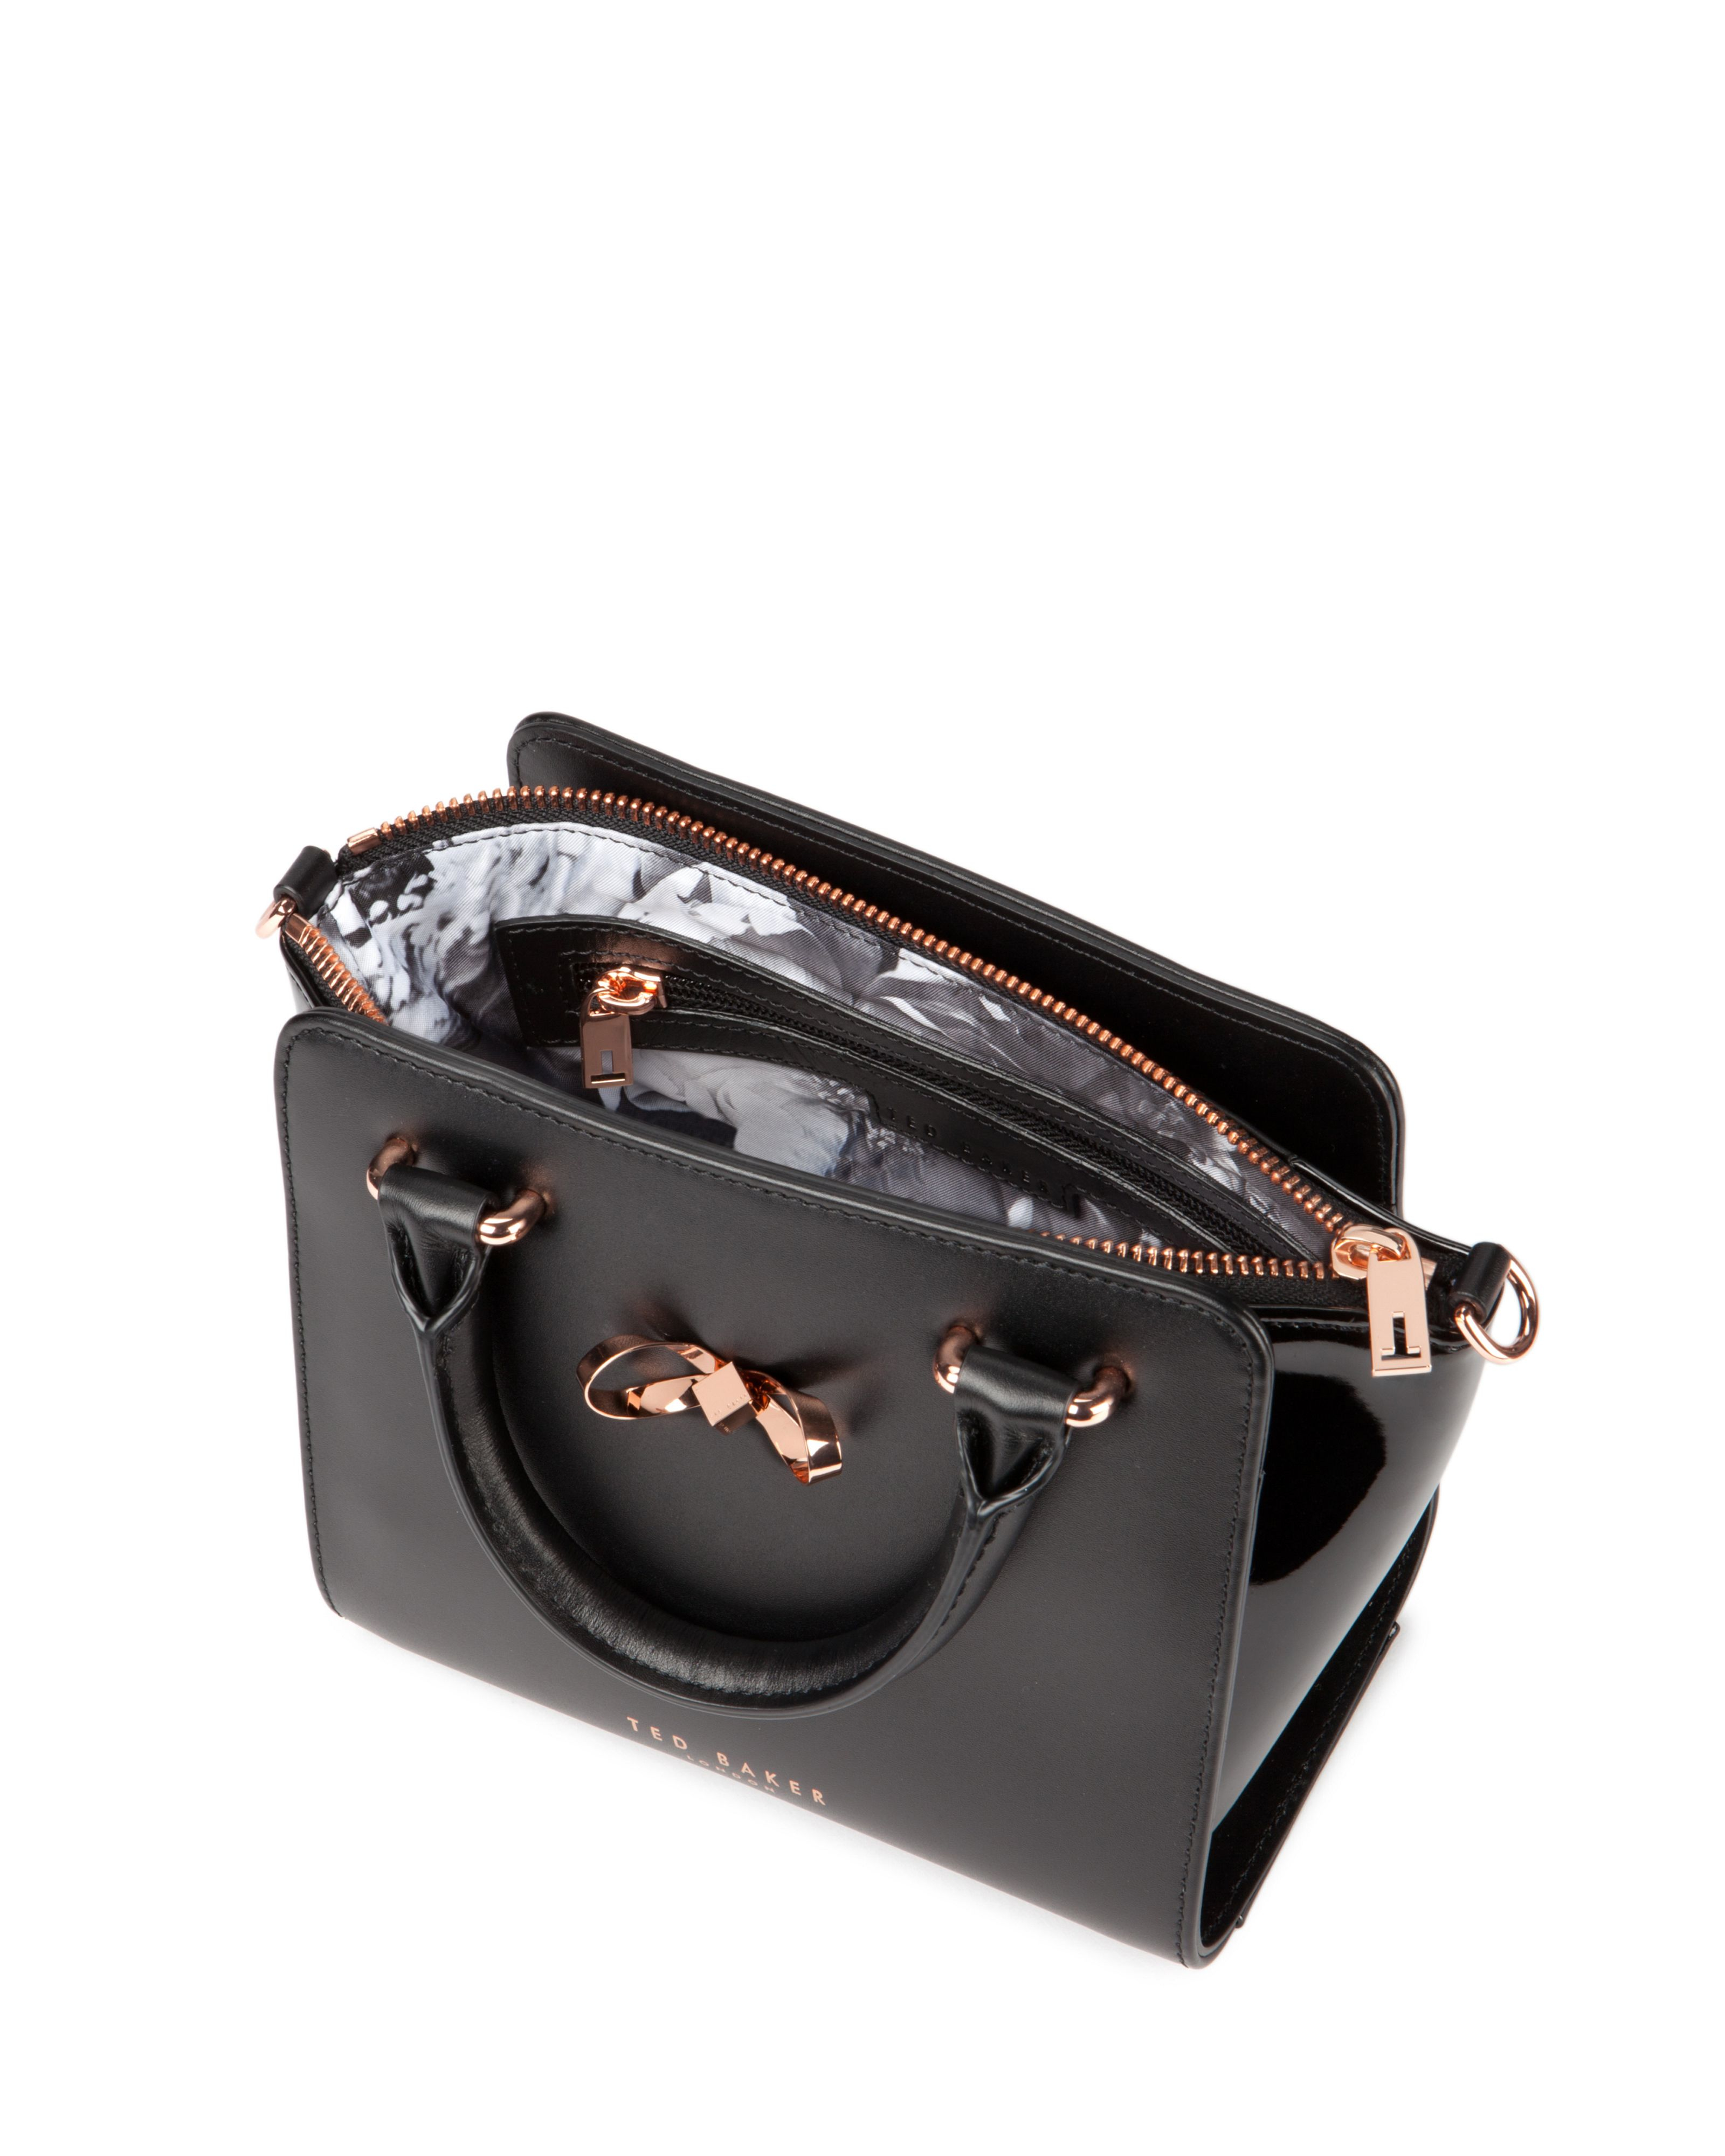 Ted baker Perie Mini Patent Leather Tote Bag in Black | Lyst